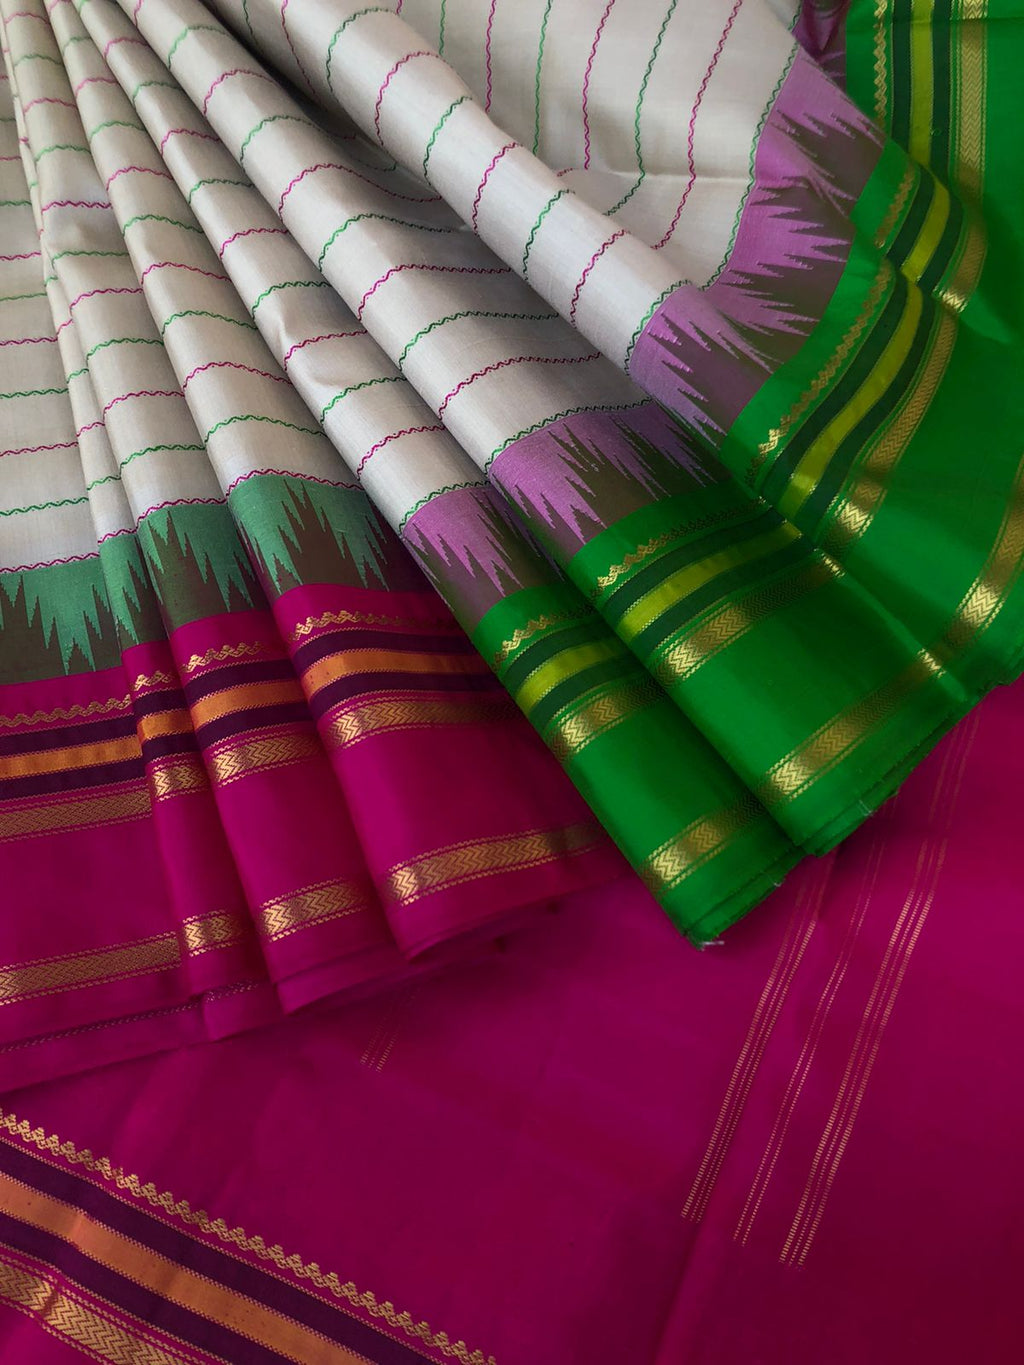 Korvai Connection on Kanchivaram - most beautiful pale greyish off white with green and pink ganga jammuna woven borders